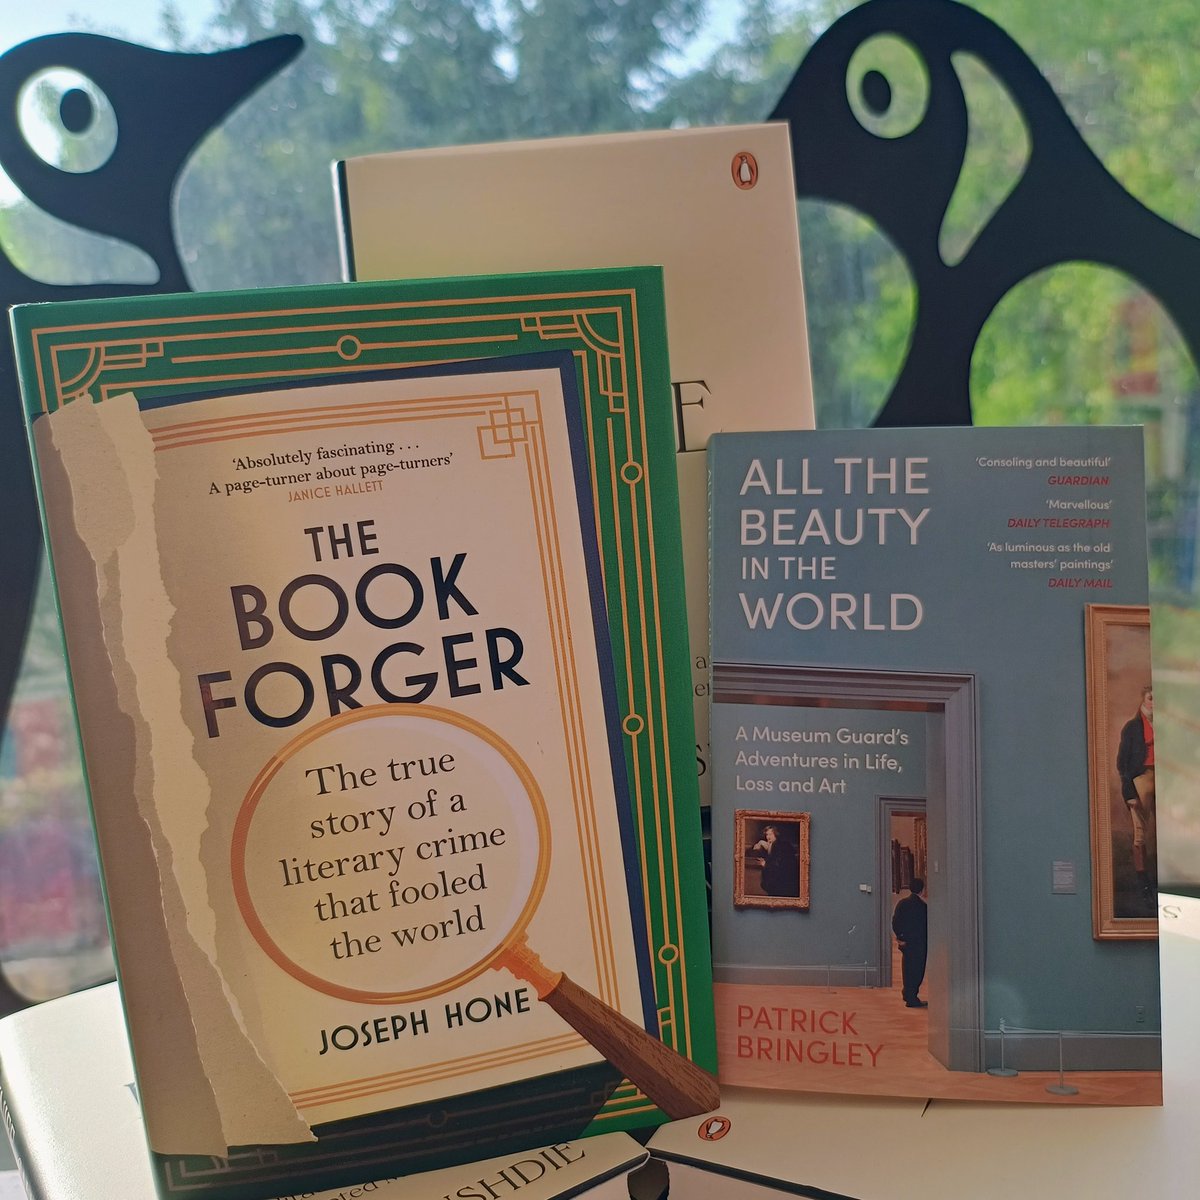 Two brilliant new books have arrived at @kunzum today!